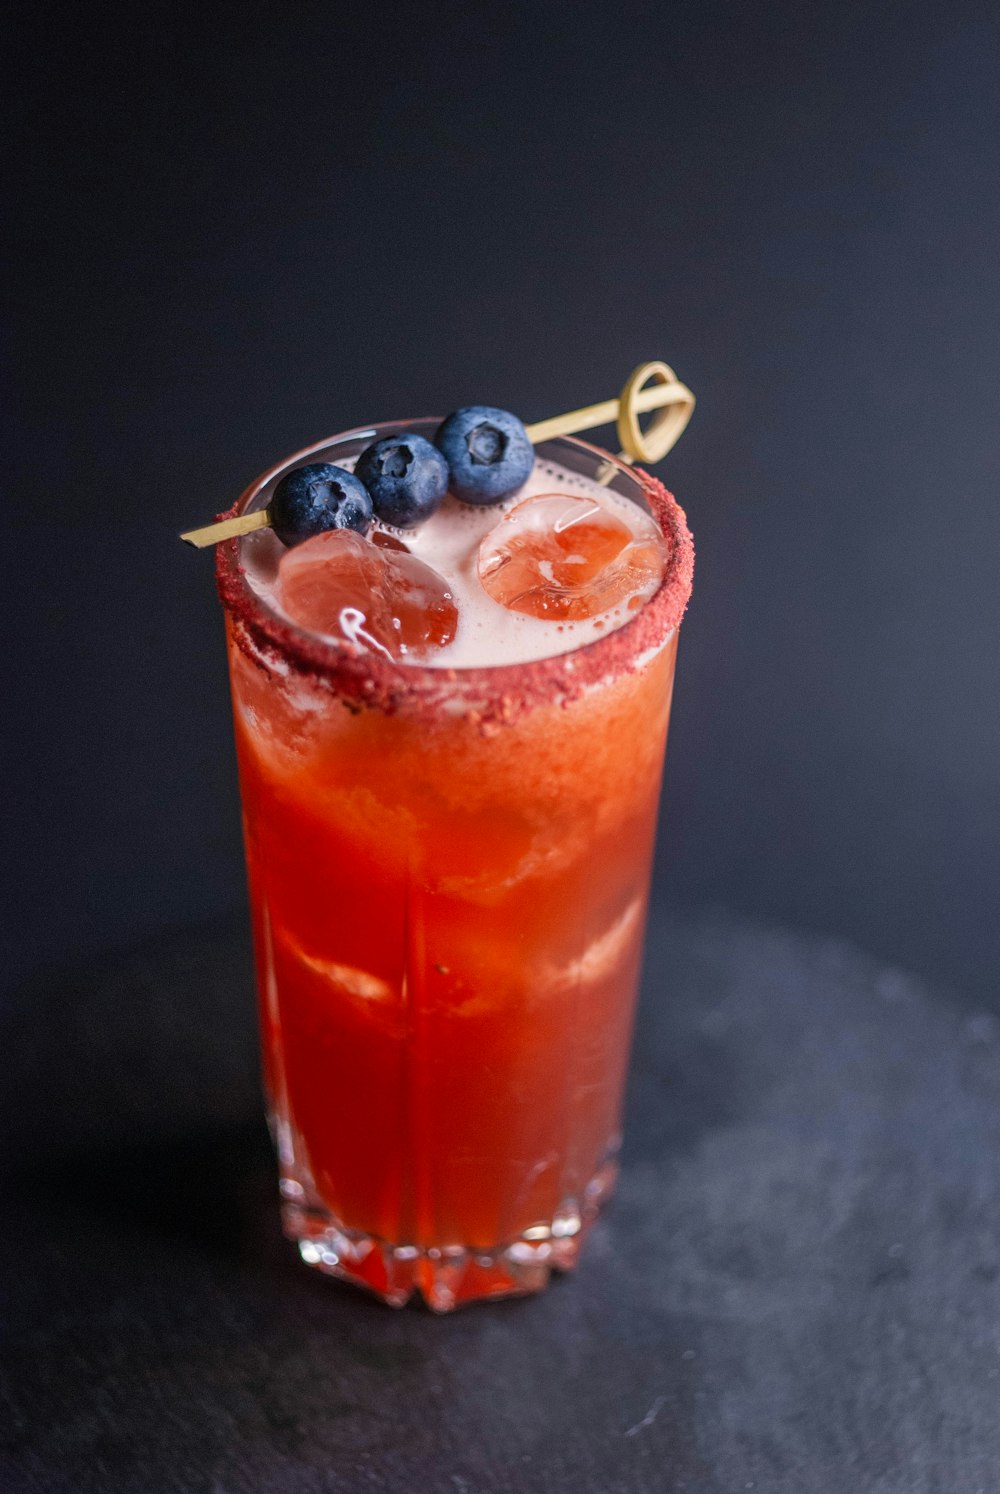 a red drink with blueberries and a gold garnish